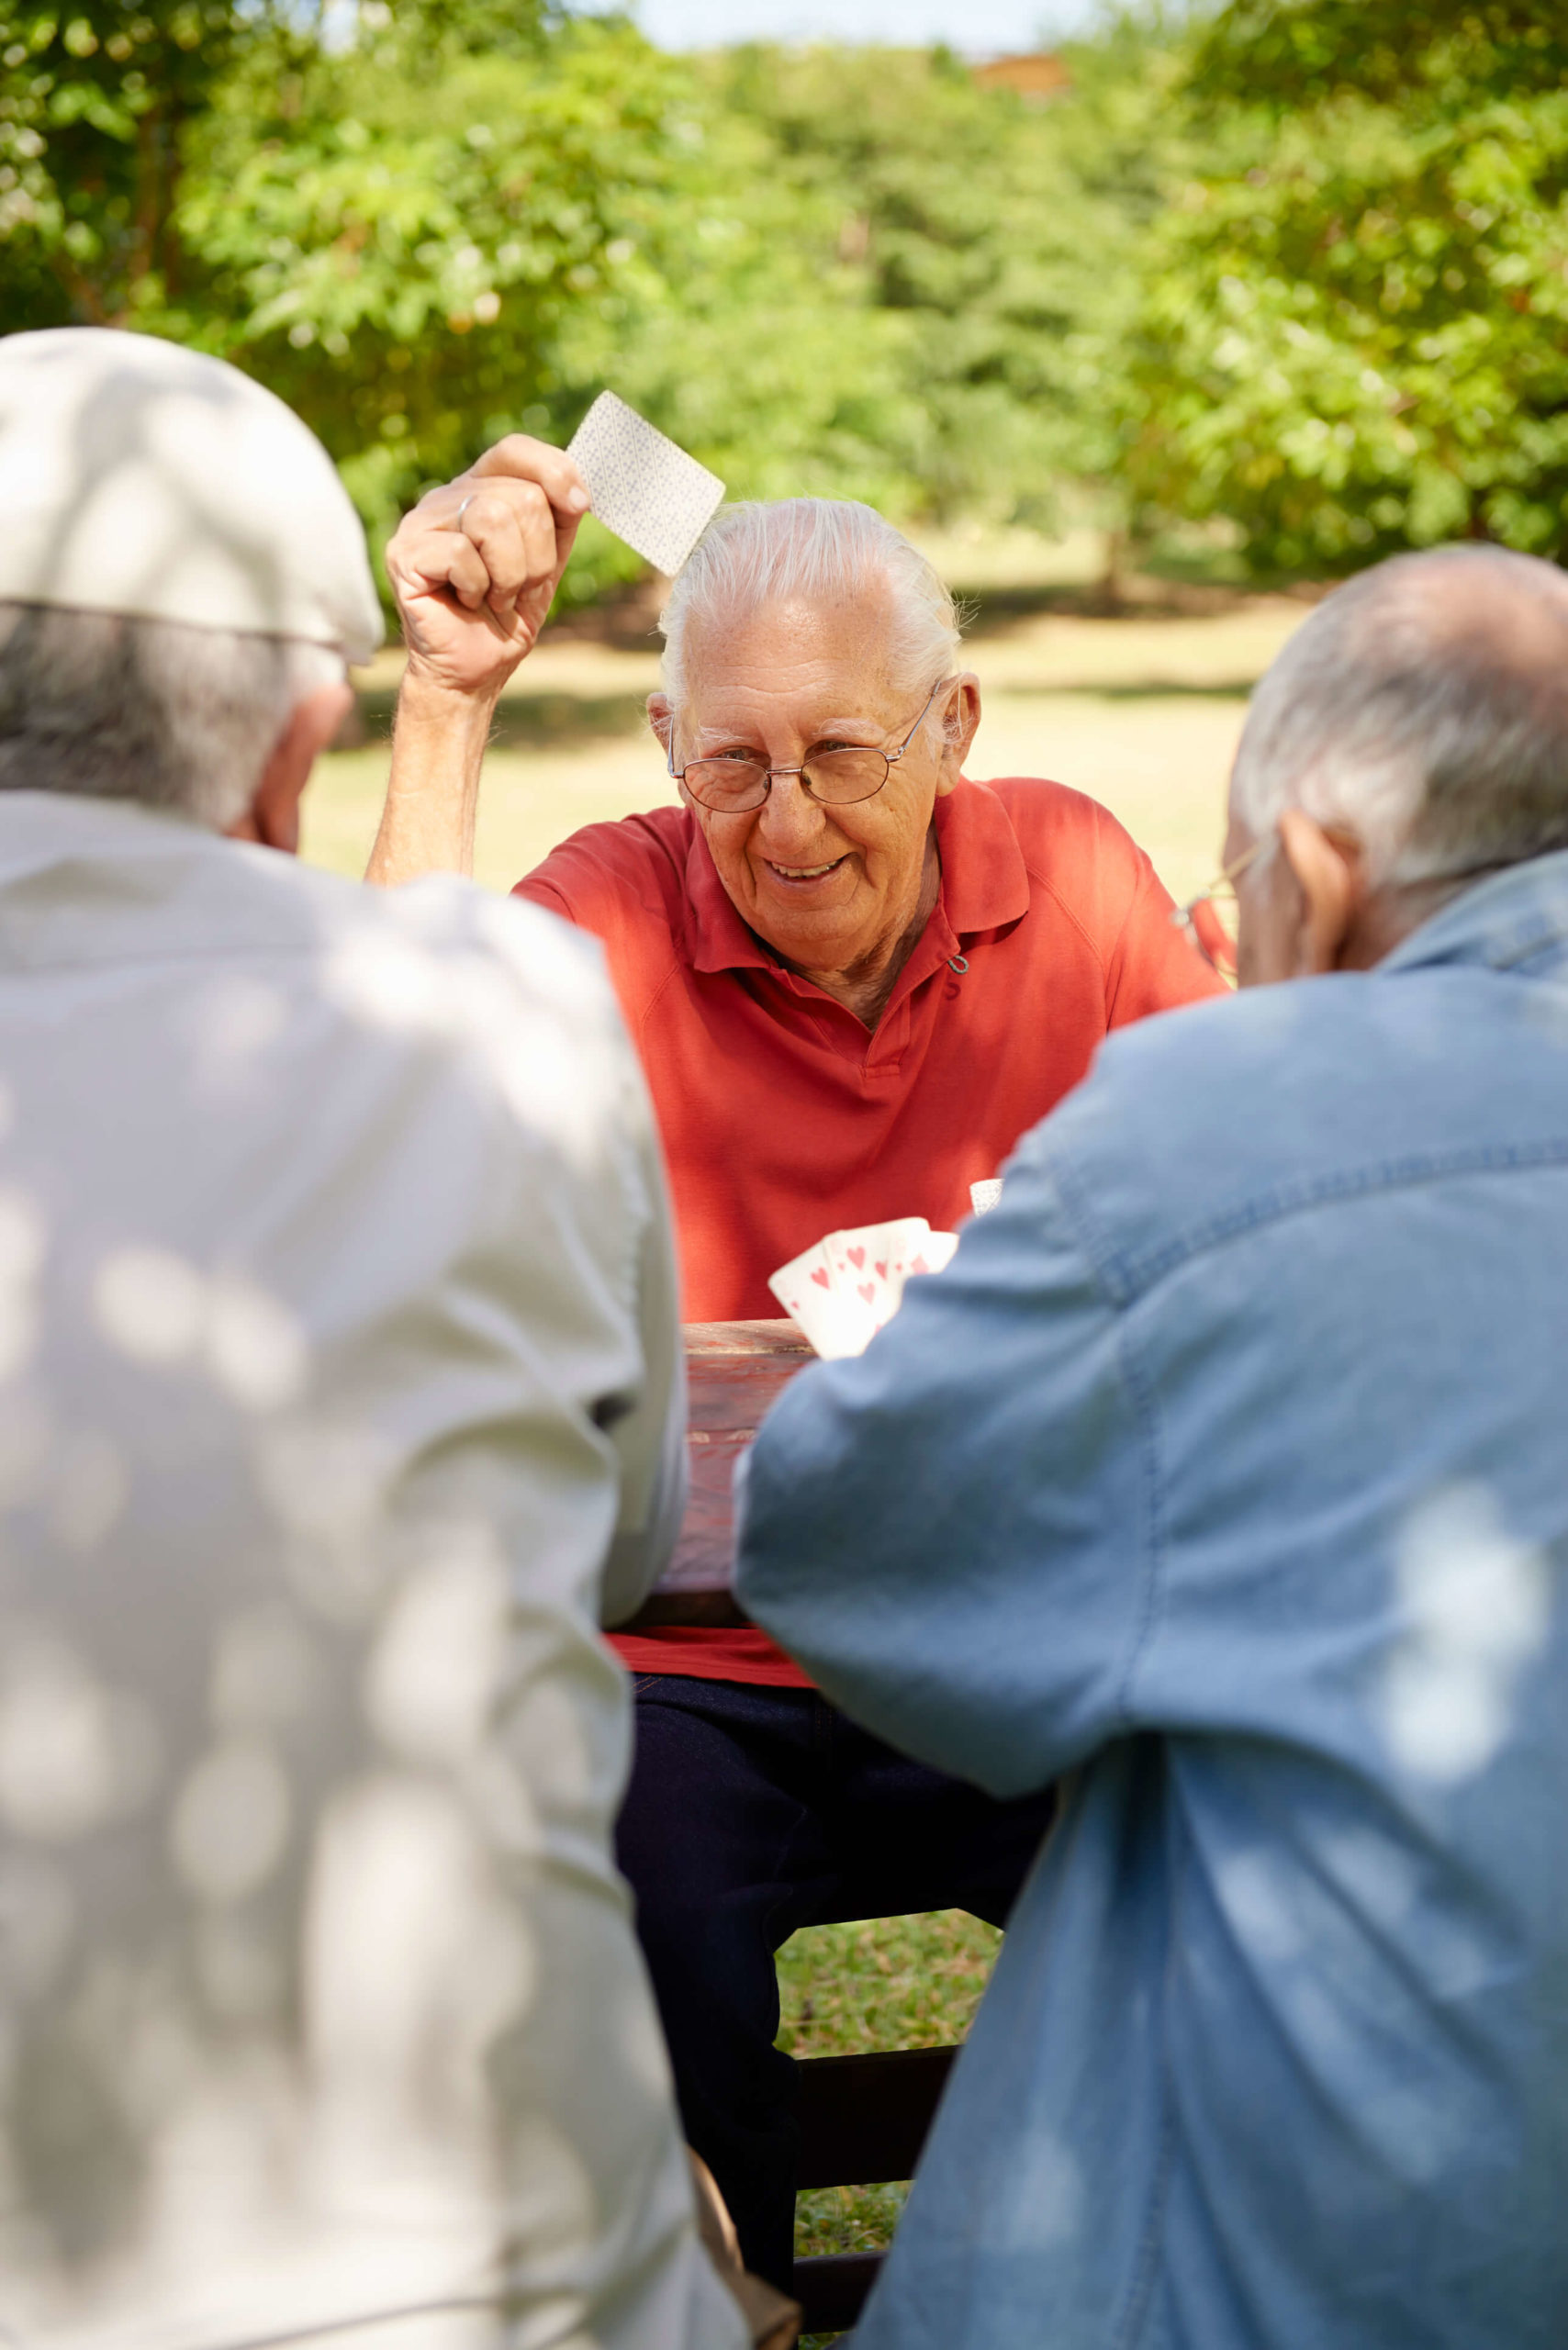 Residents engaged in group activities, including board games, puzzles, and arts and crafts.